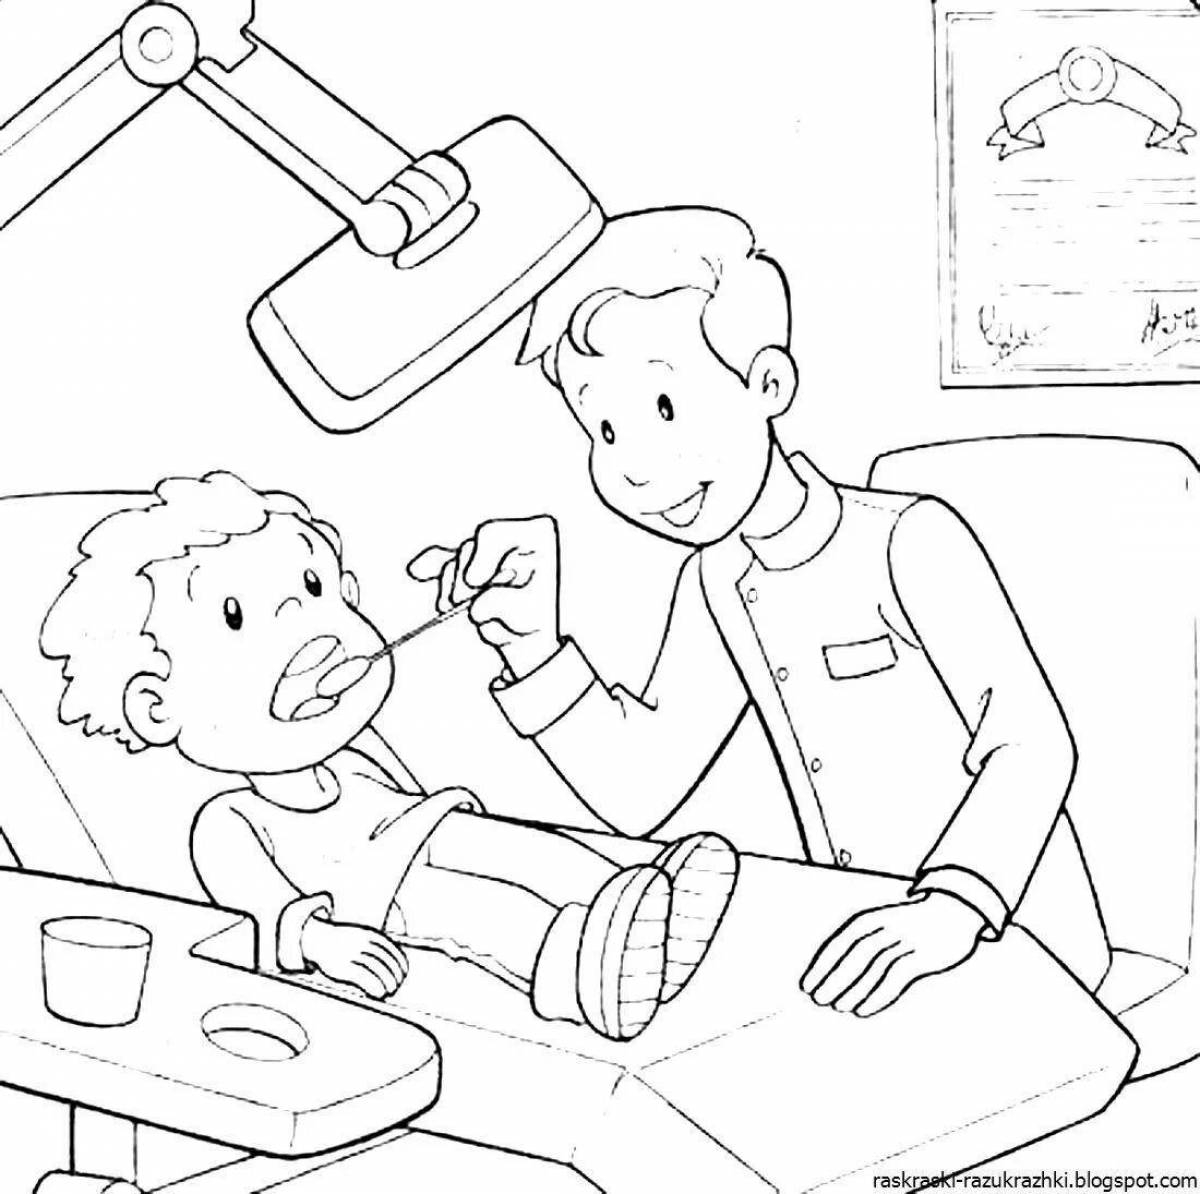 Adorable Class 1 Profession Coloring Page